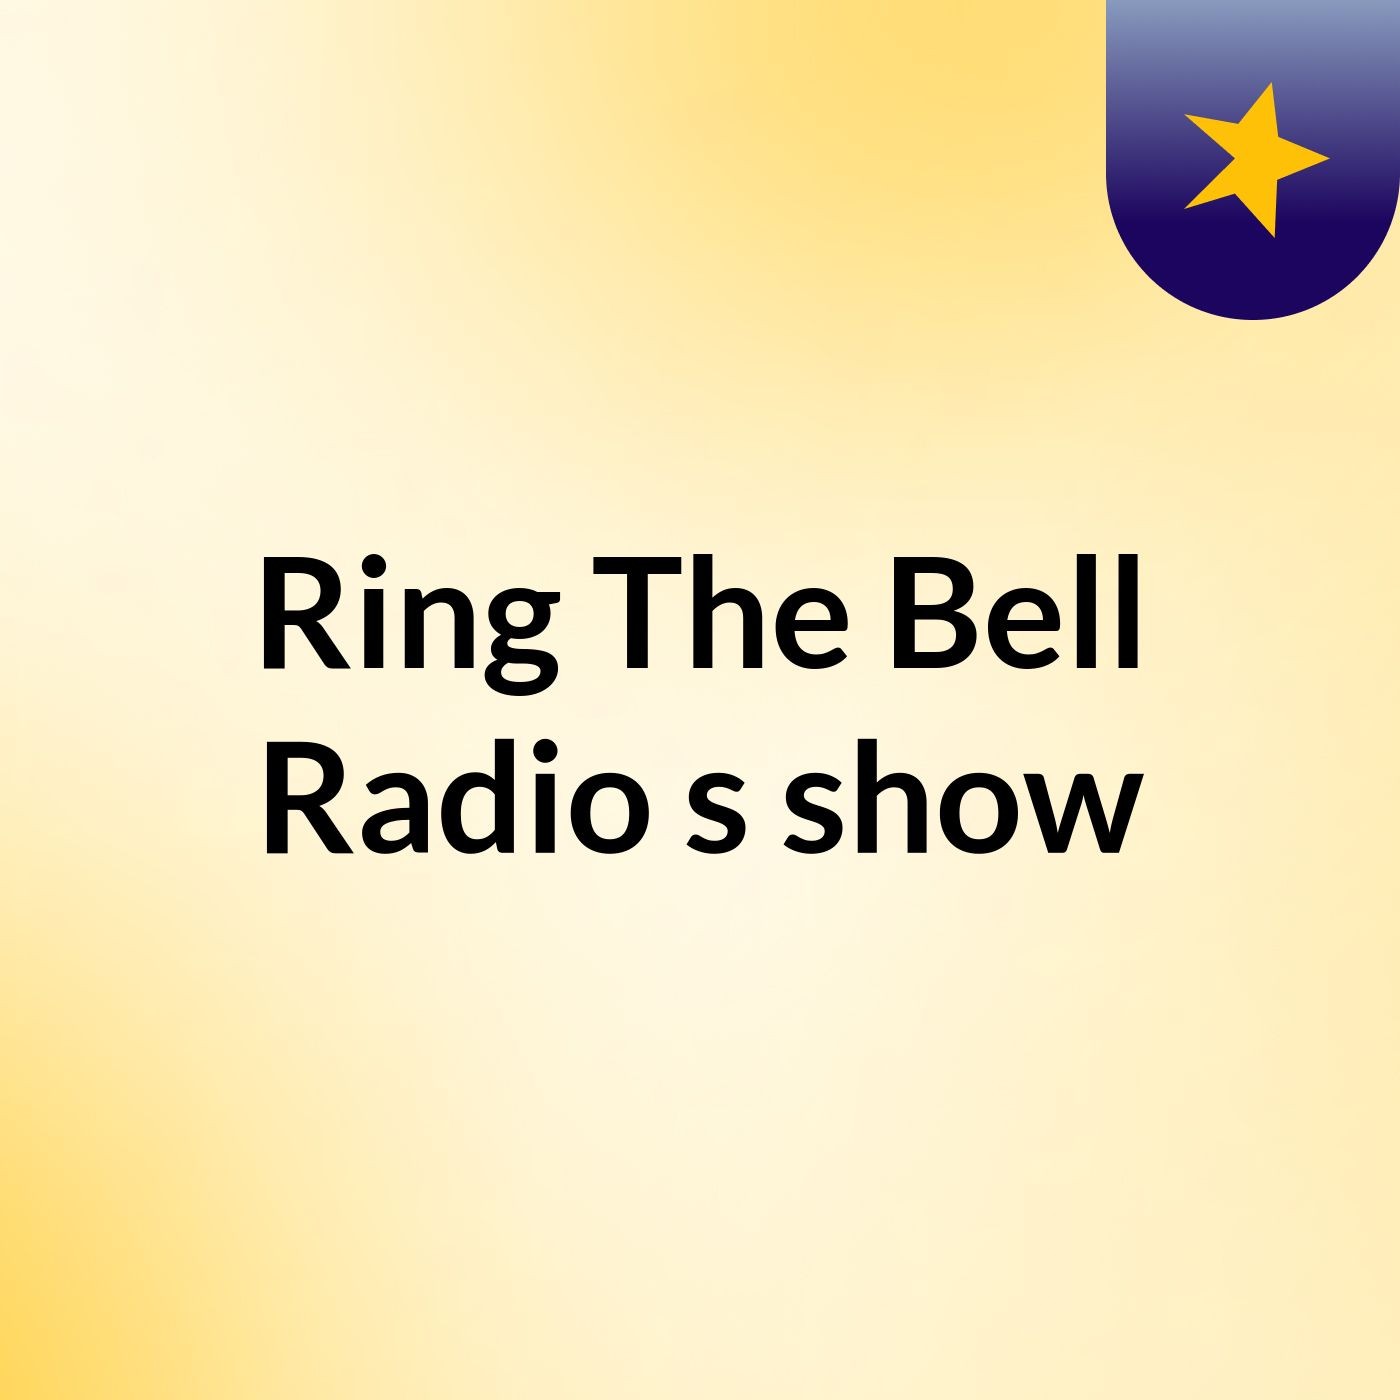 Ring The Bell Radio's show